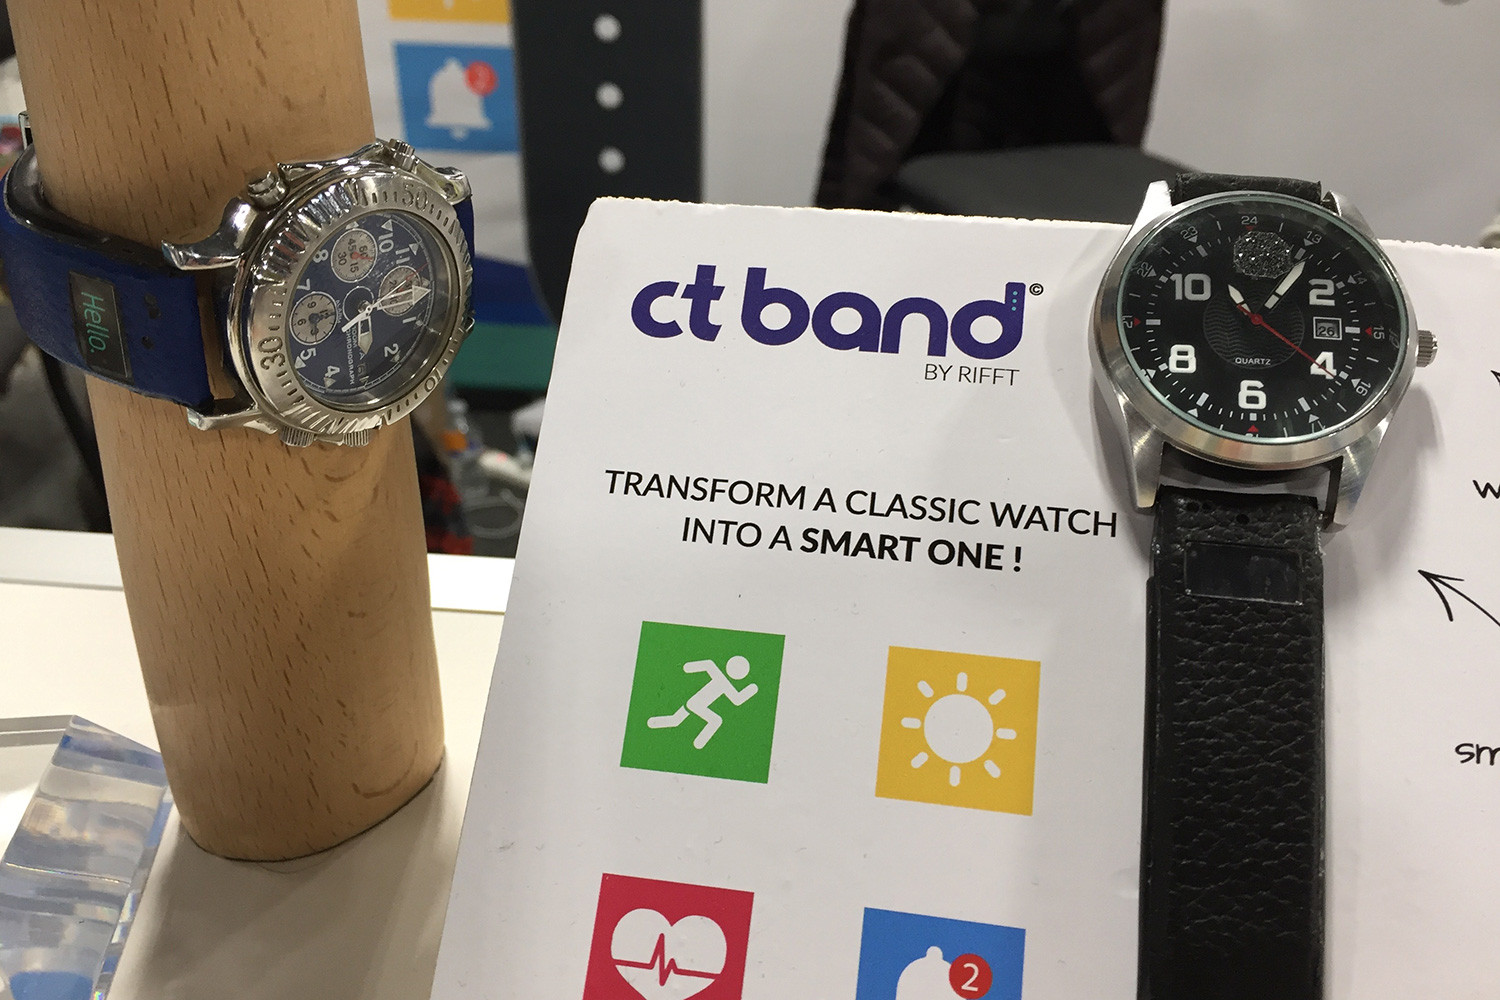 ct band smart watch ces 2017 img 6044